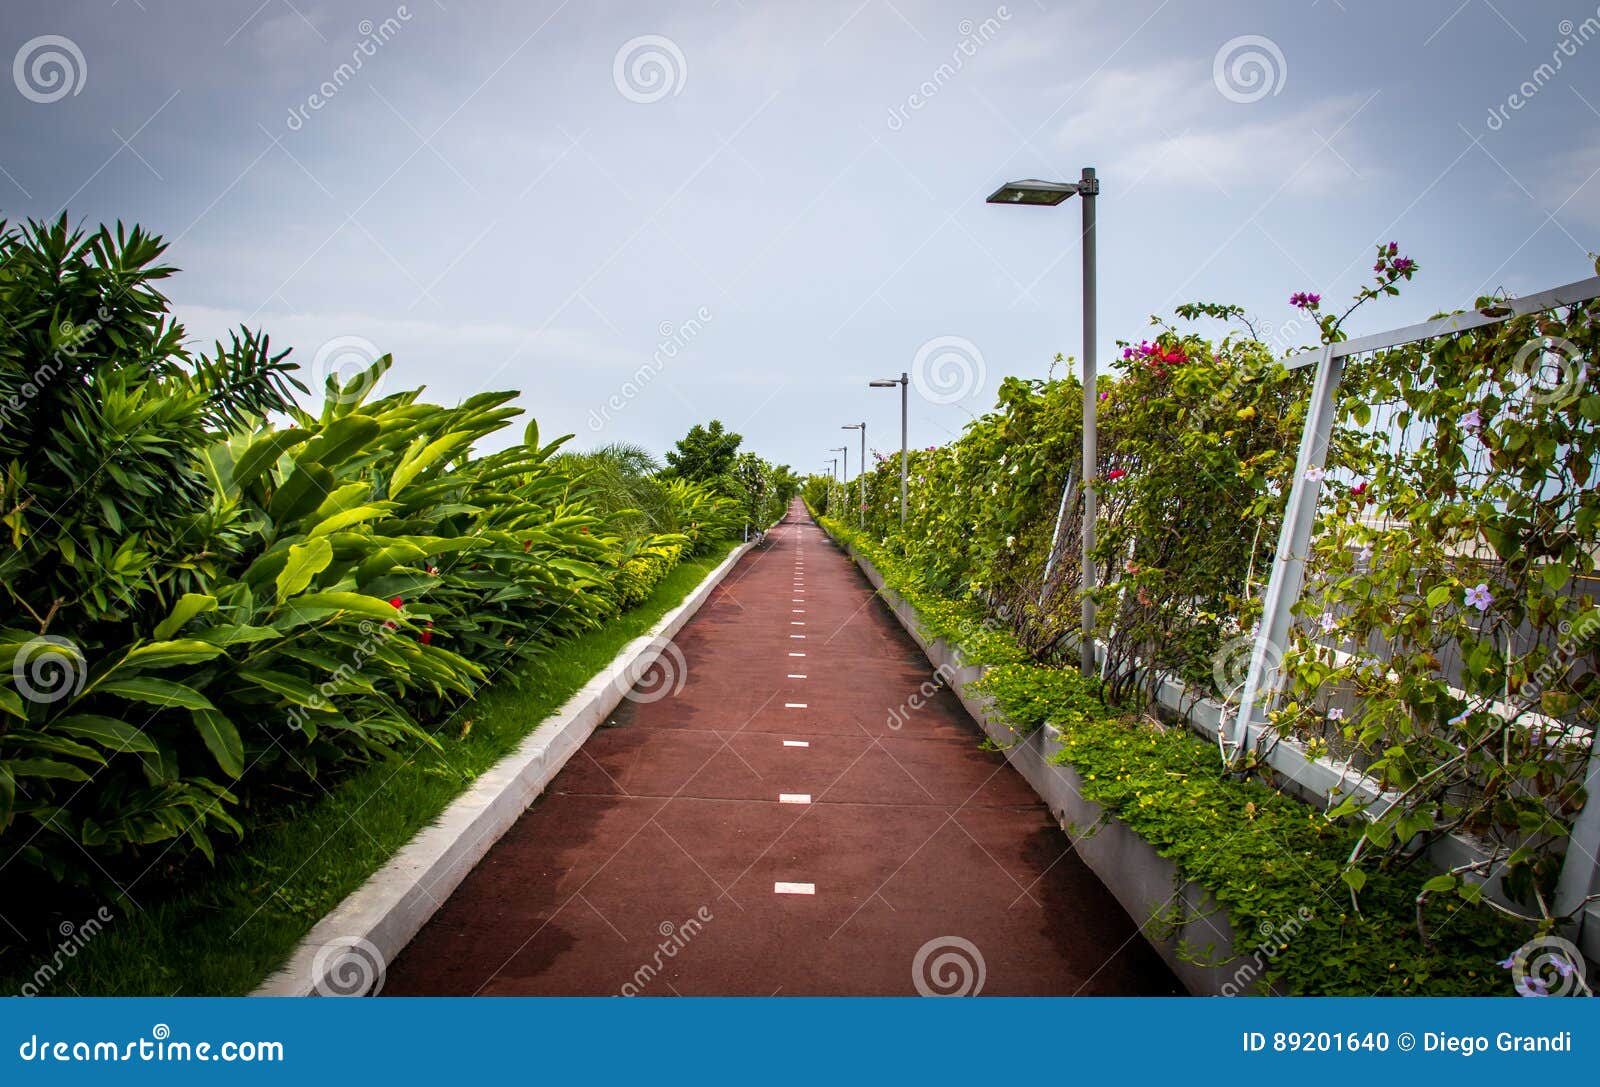 bicycle lane and a jogging path surrounded by green in cinta costera - panama city, panama